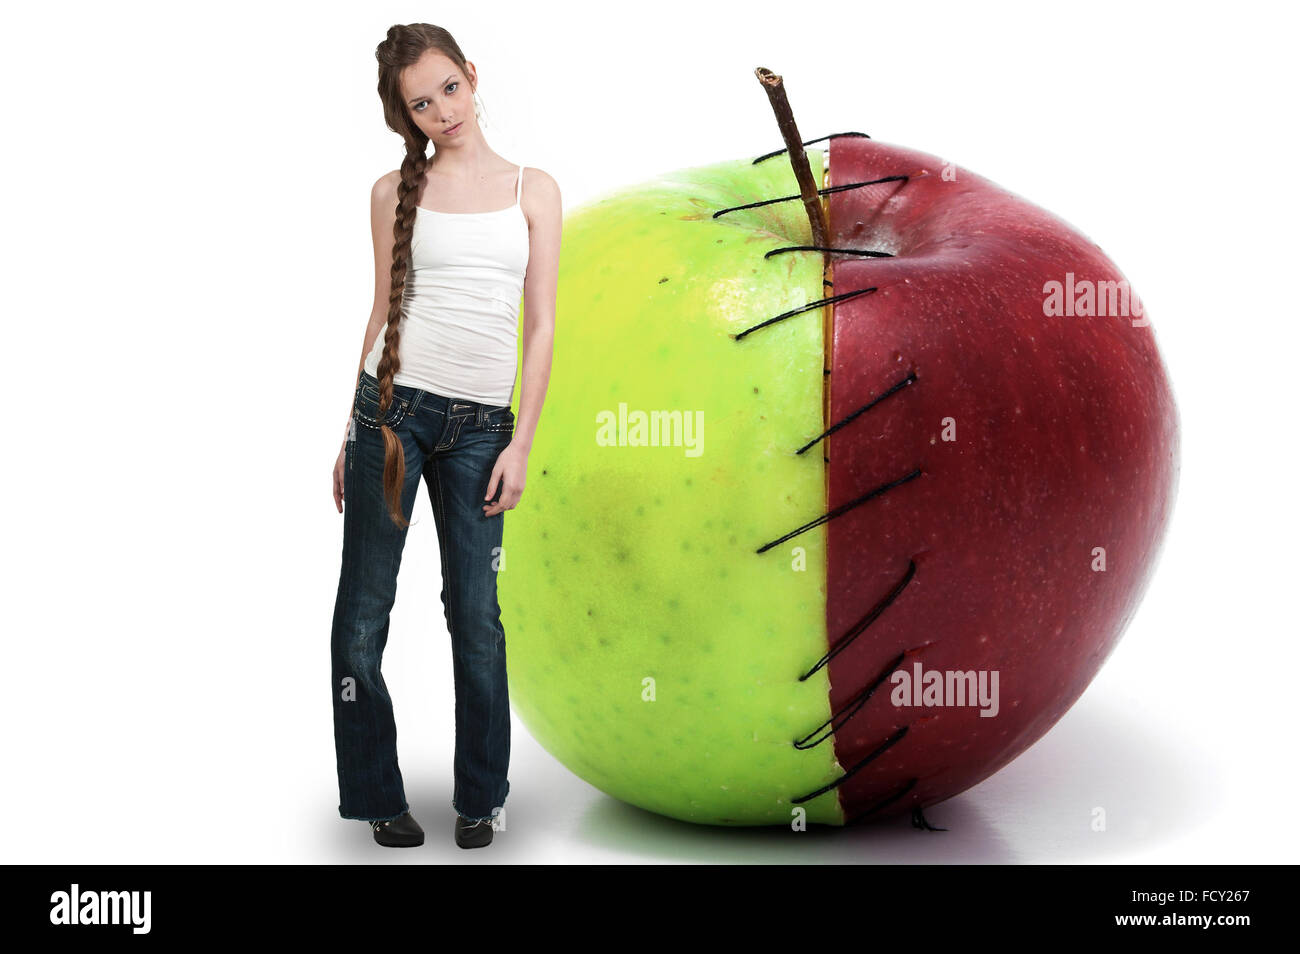 Beautiful teenage woman standing beside a whole red delicious apple with a nutrition label Stock Photo